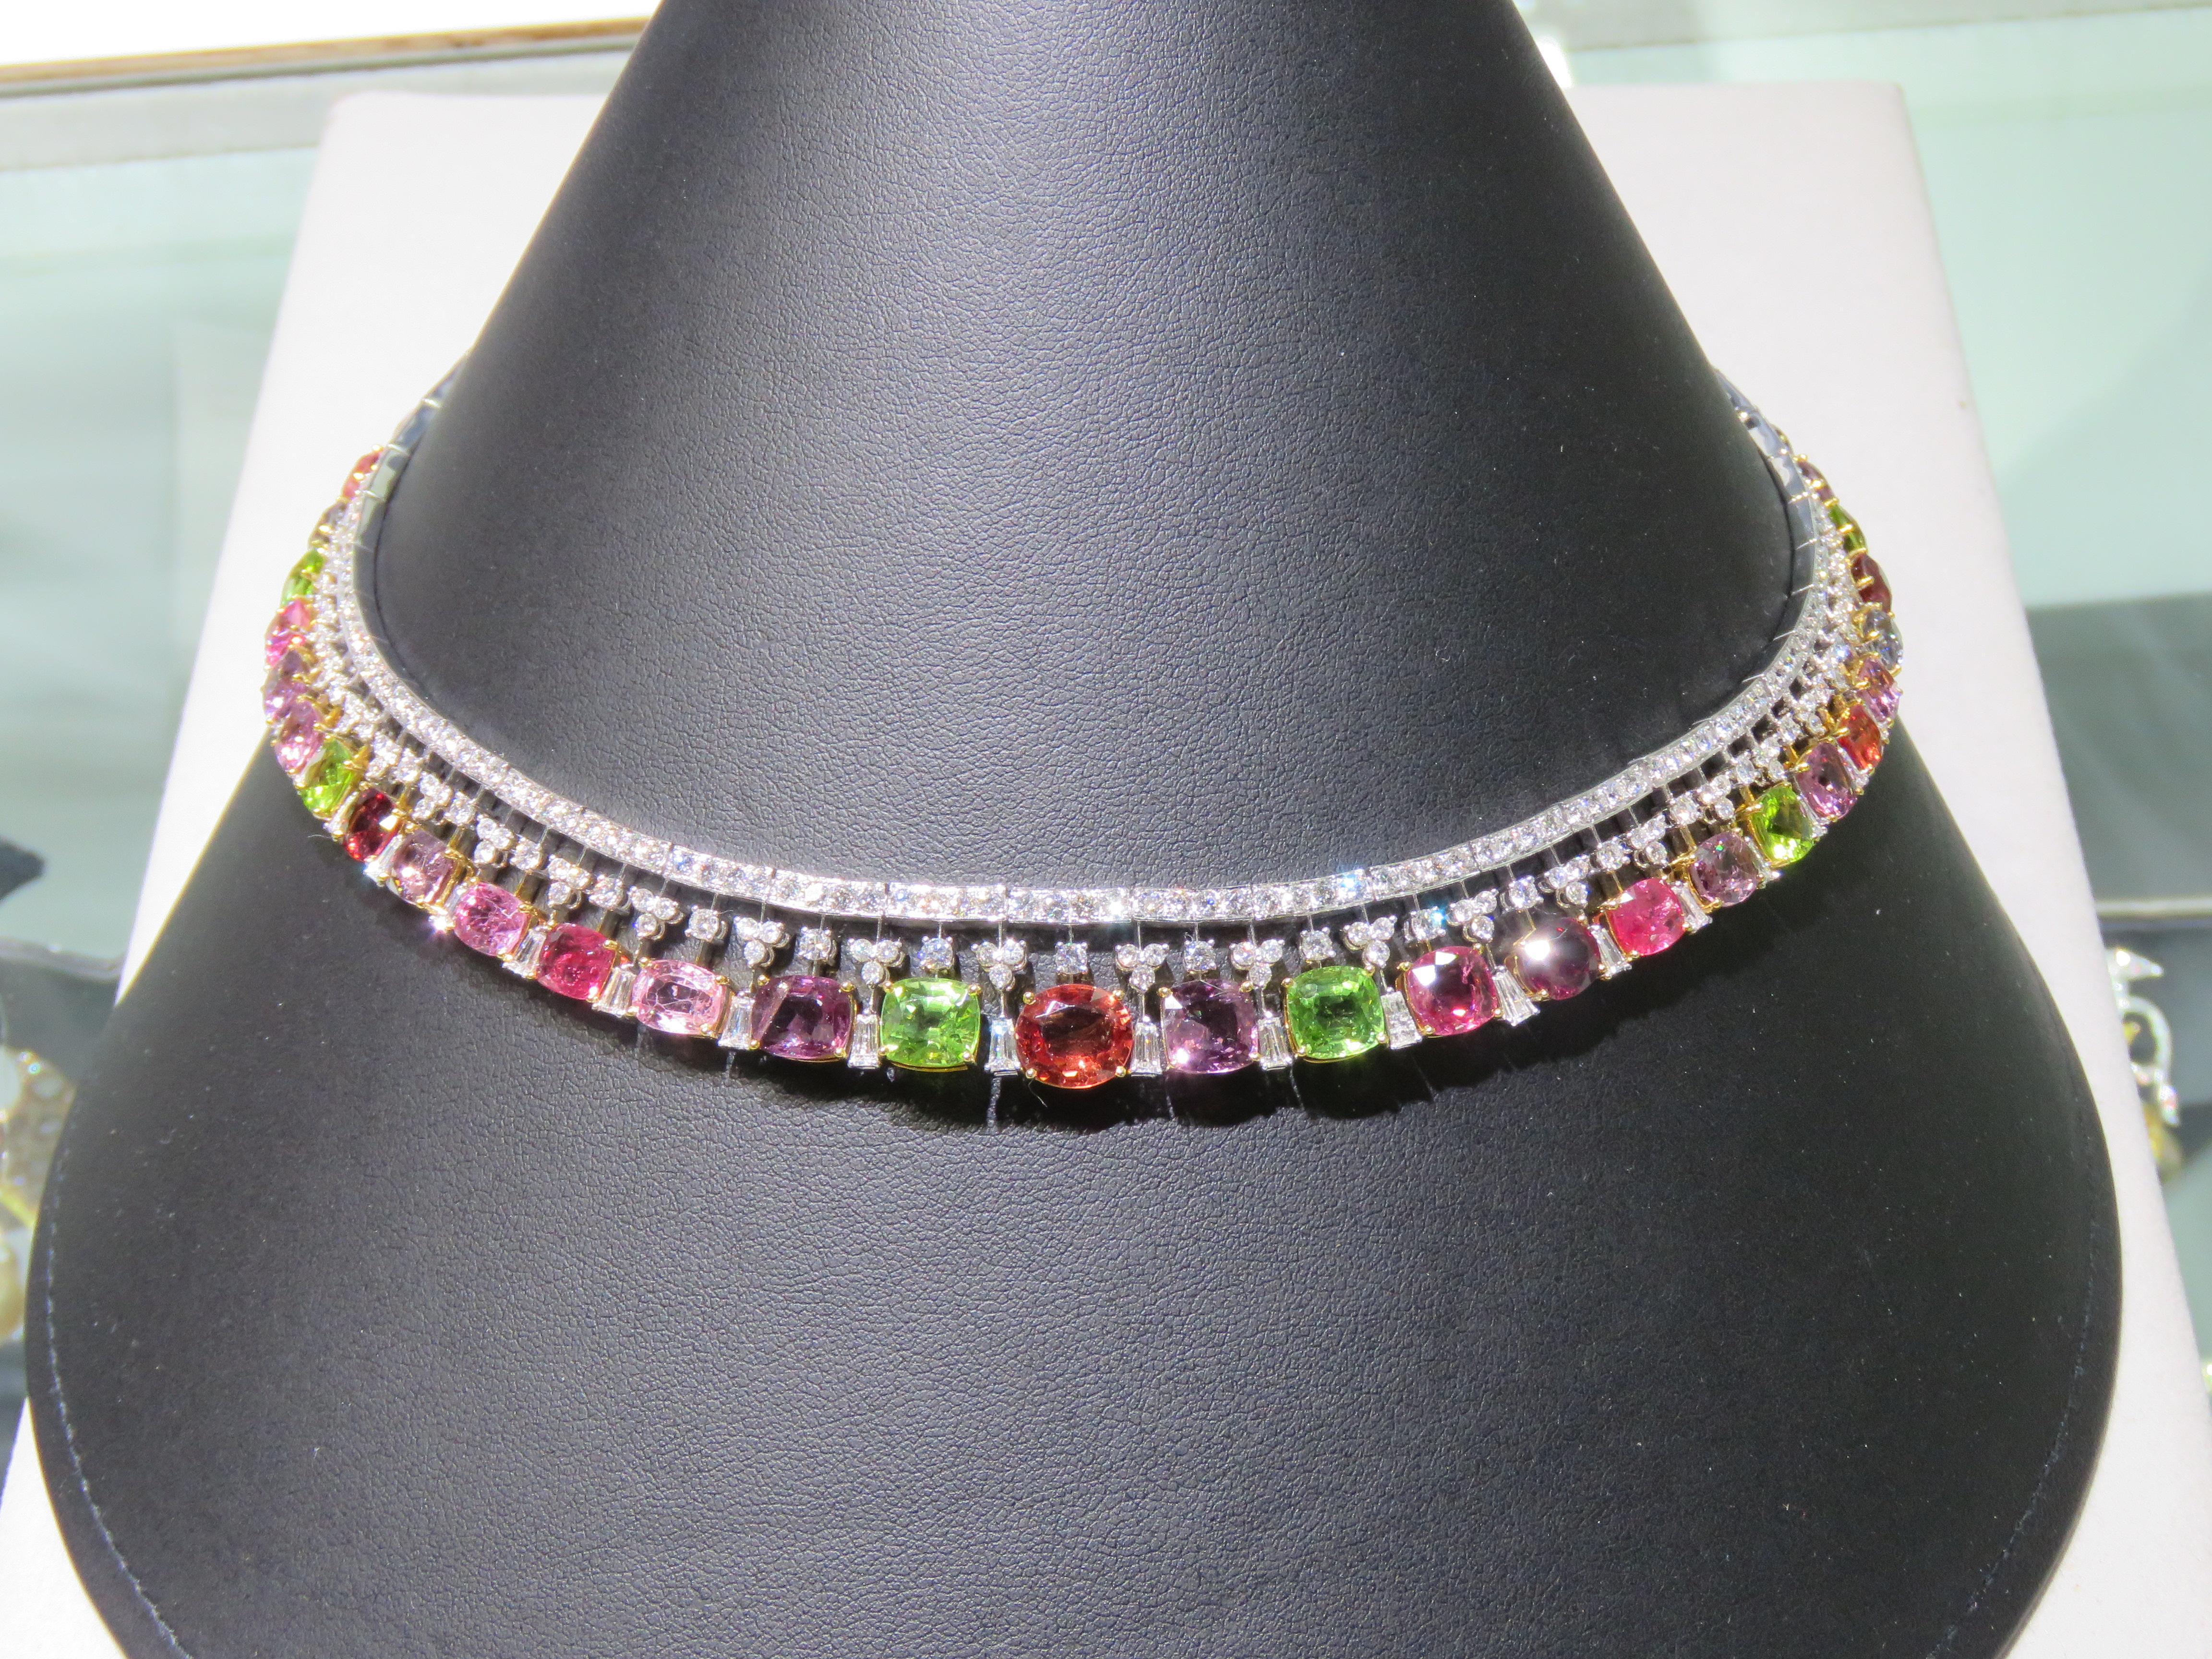 The Following Item we are offering is a Rare 18KT White Gold Large Fancy Color Spinel Jeweled Diamond Peridot Necklace. Necklace is comprised of Finely Set Gorgeous Glittering Fancy Colored Spinels, Peridots, and Diamonds!! T.C.W. Approx 75CTS!!